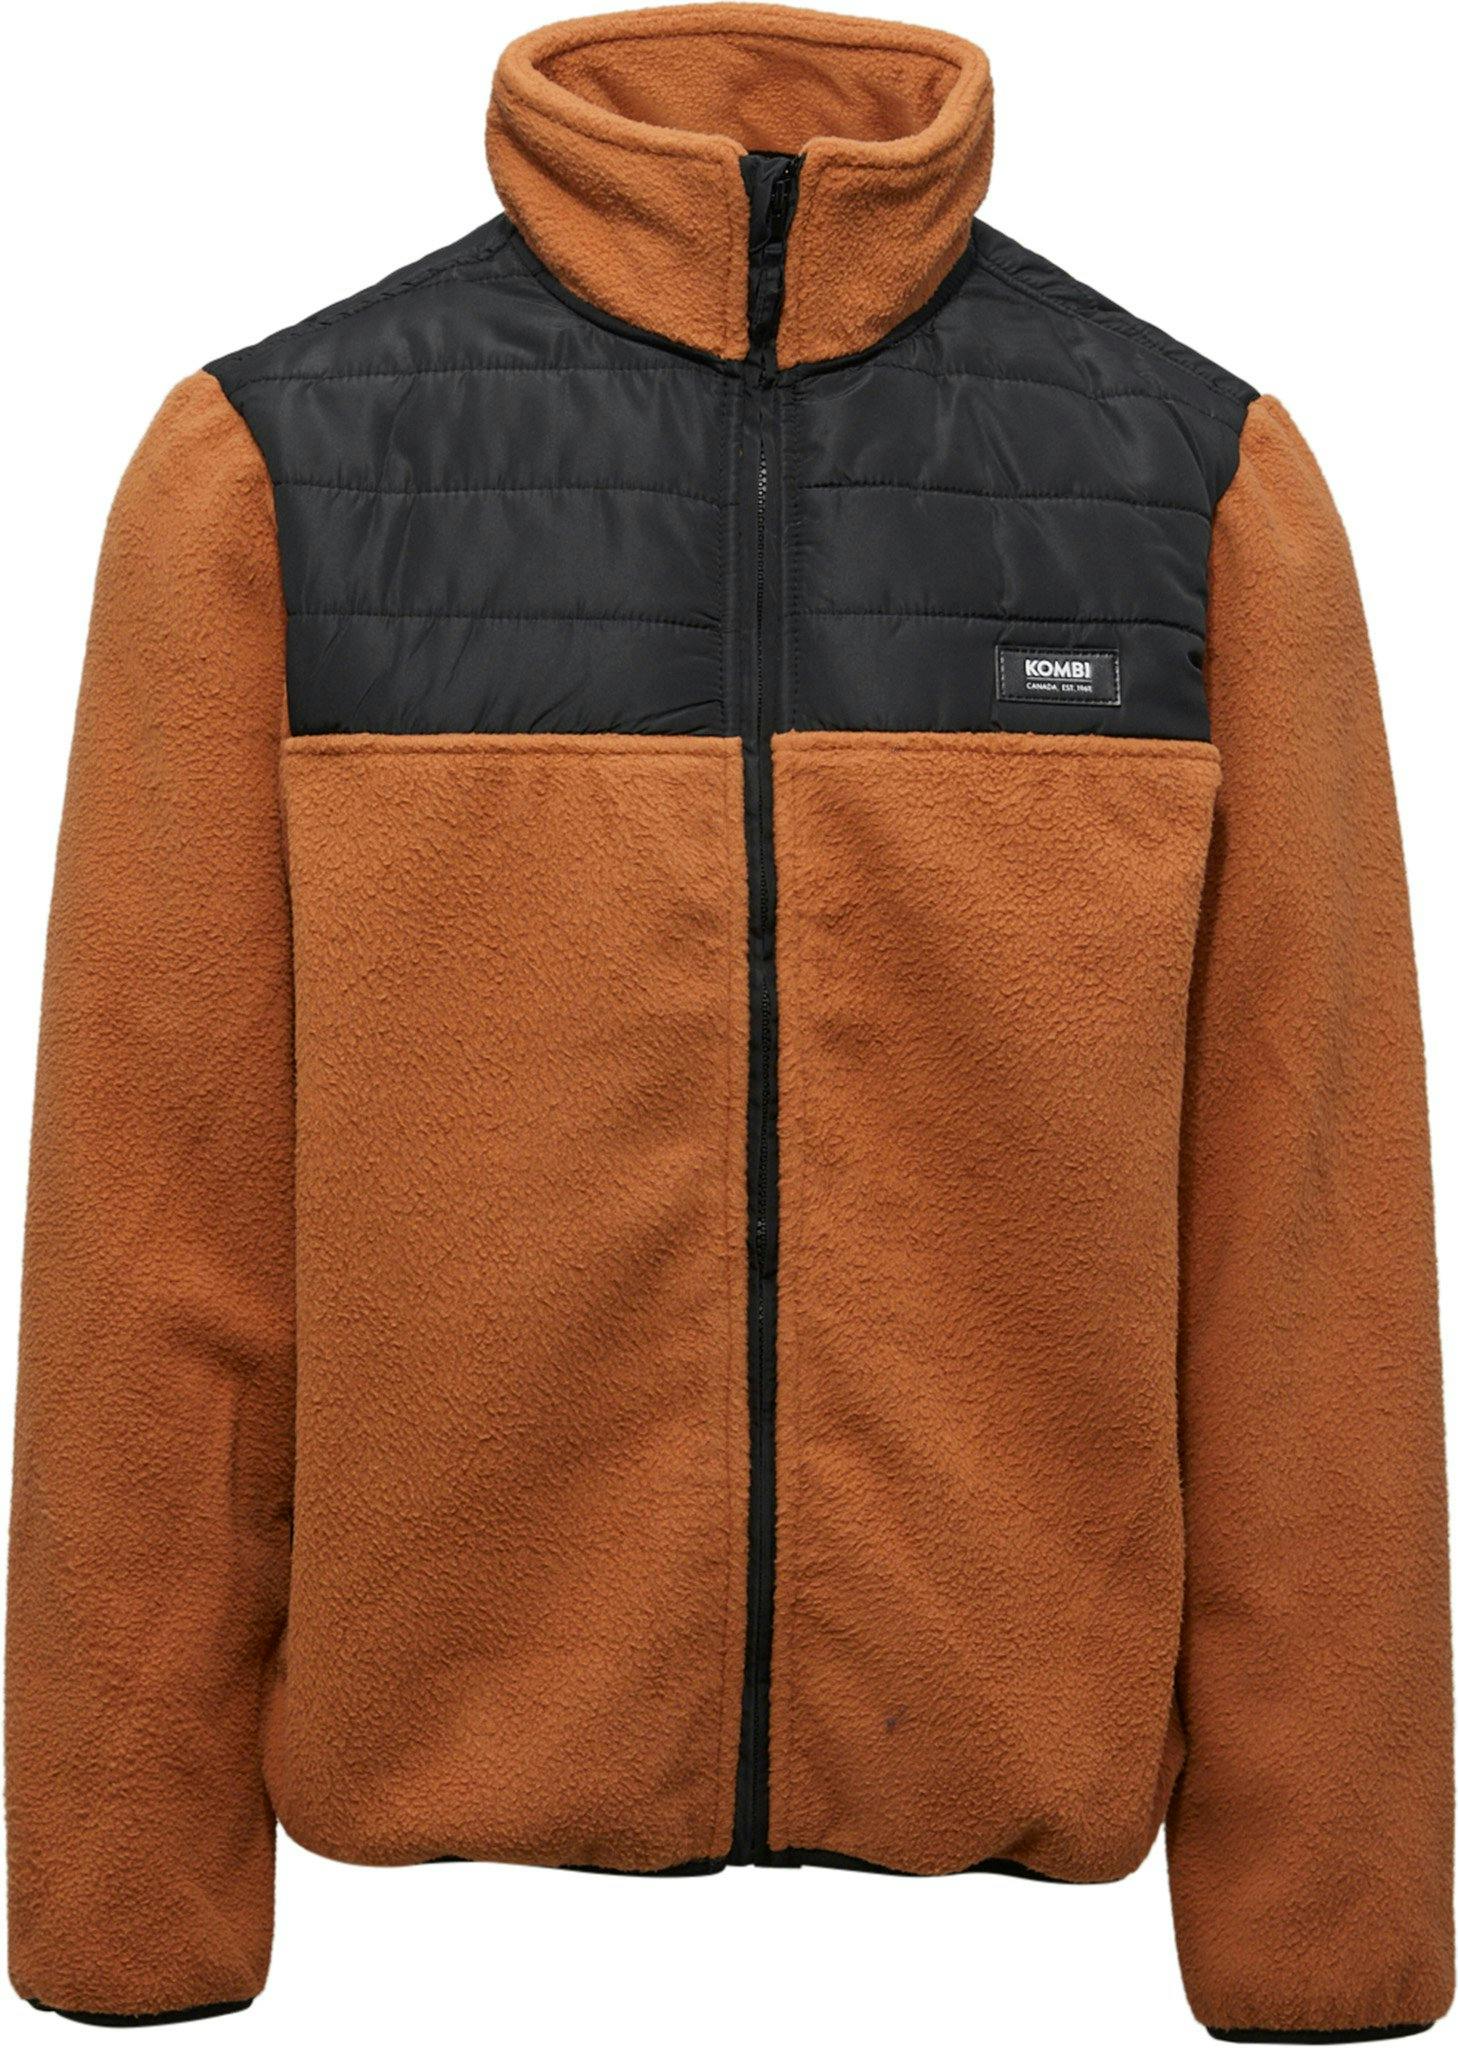 Product image for Green Land Recycled Fleece Jacket - Men's